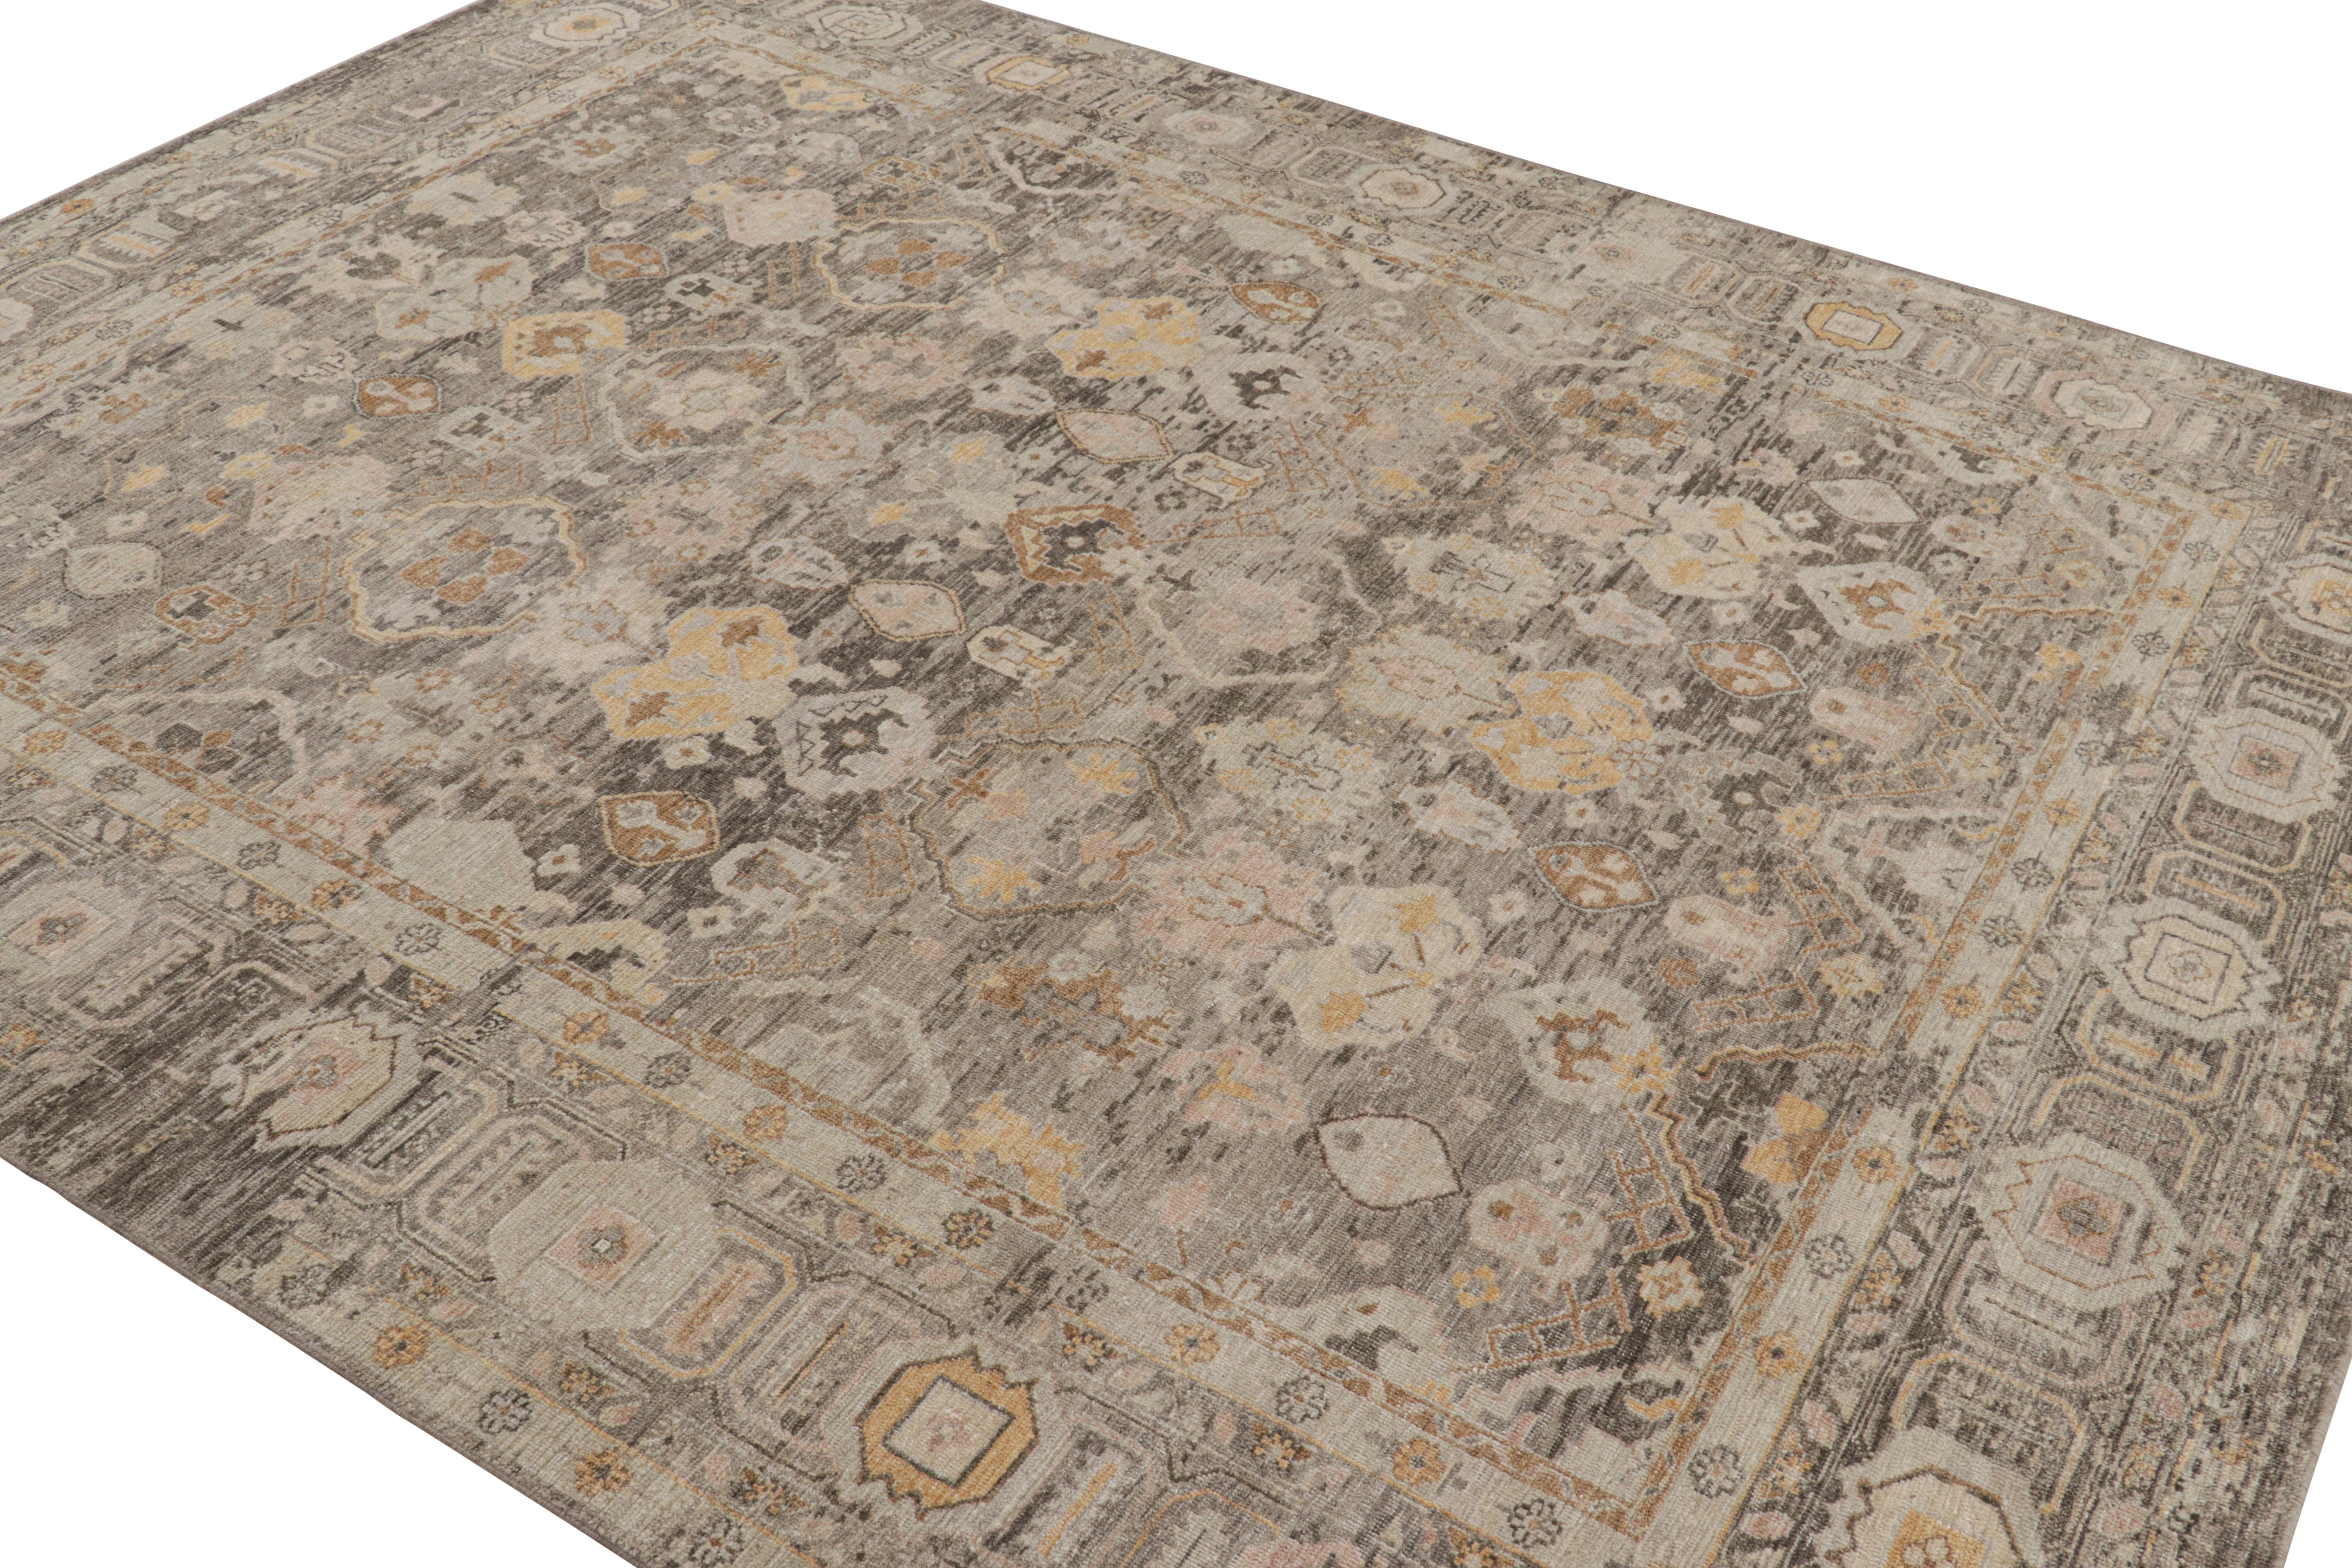 Indian Rug & Kilim’s Oushak Style Rug in Silver-Gray with Geometric-Floral Patterns For Sale